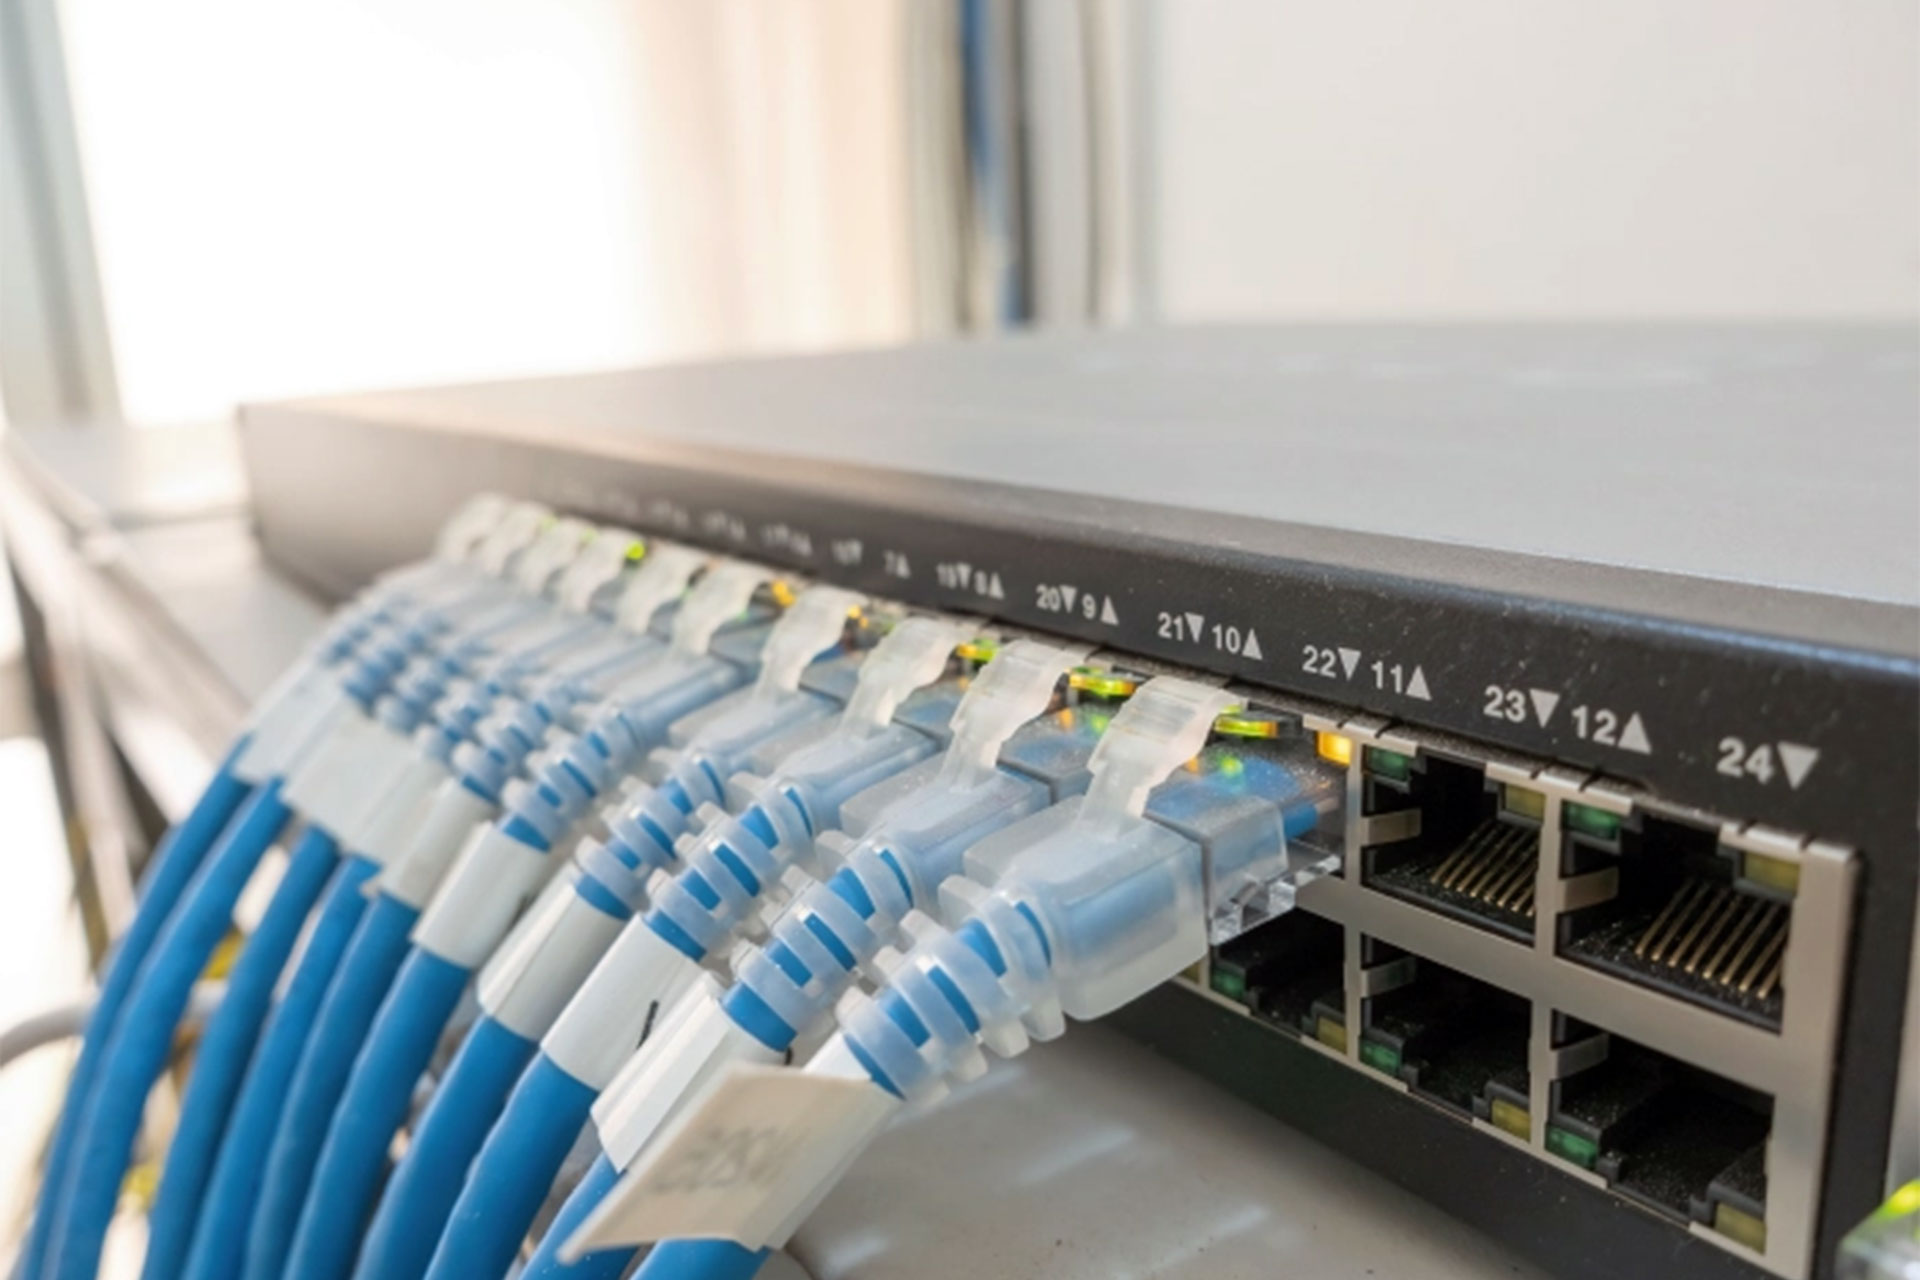 Power over Ethernet Boost Your Network With 24 Port Switch 2 | | Networking Arts